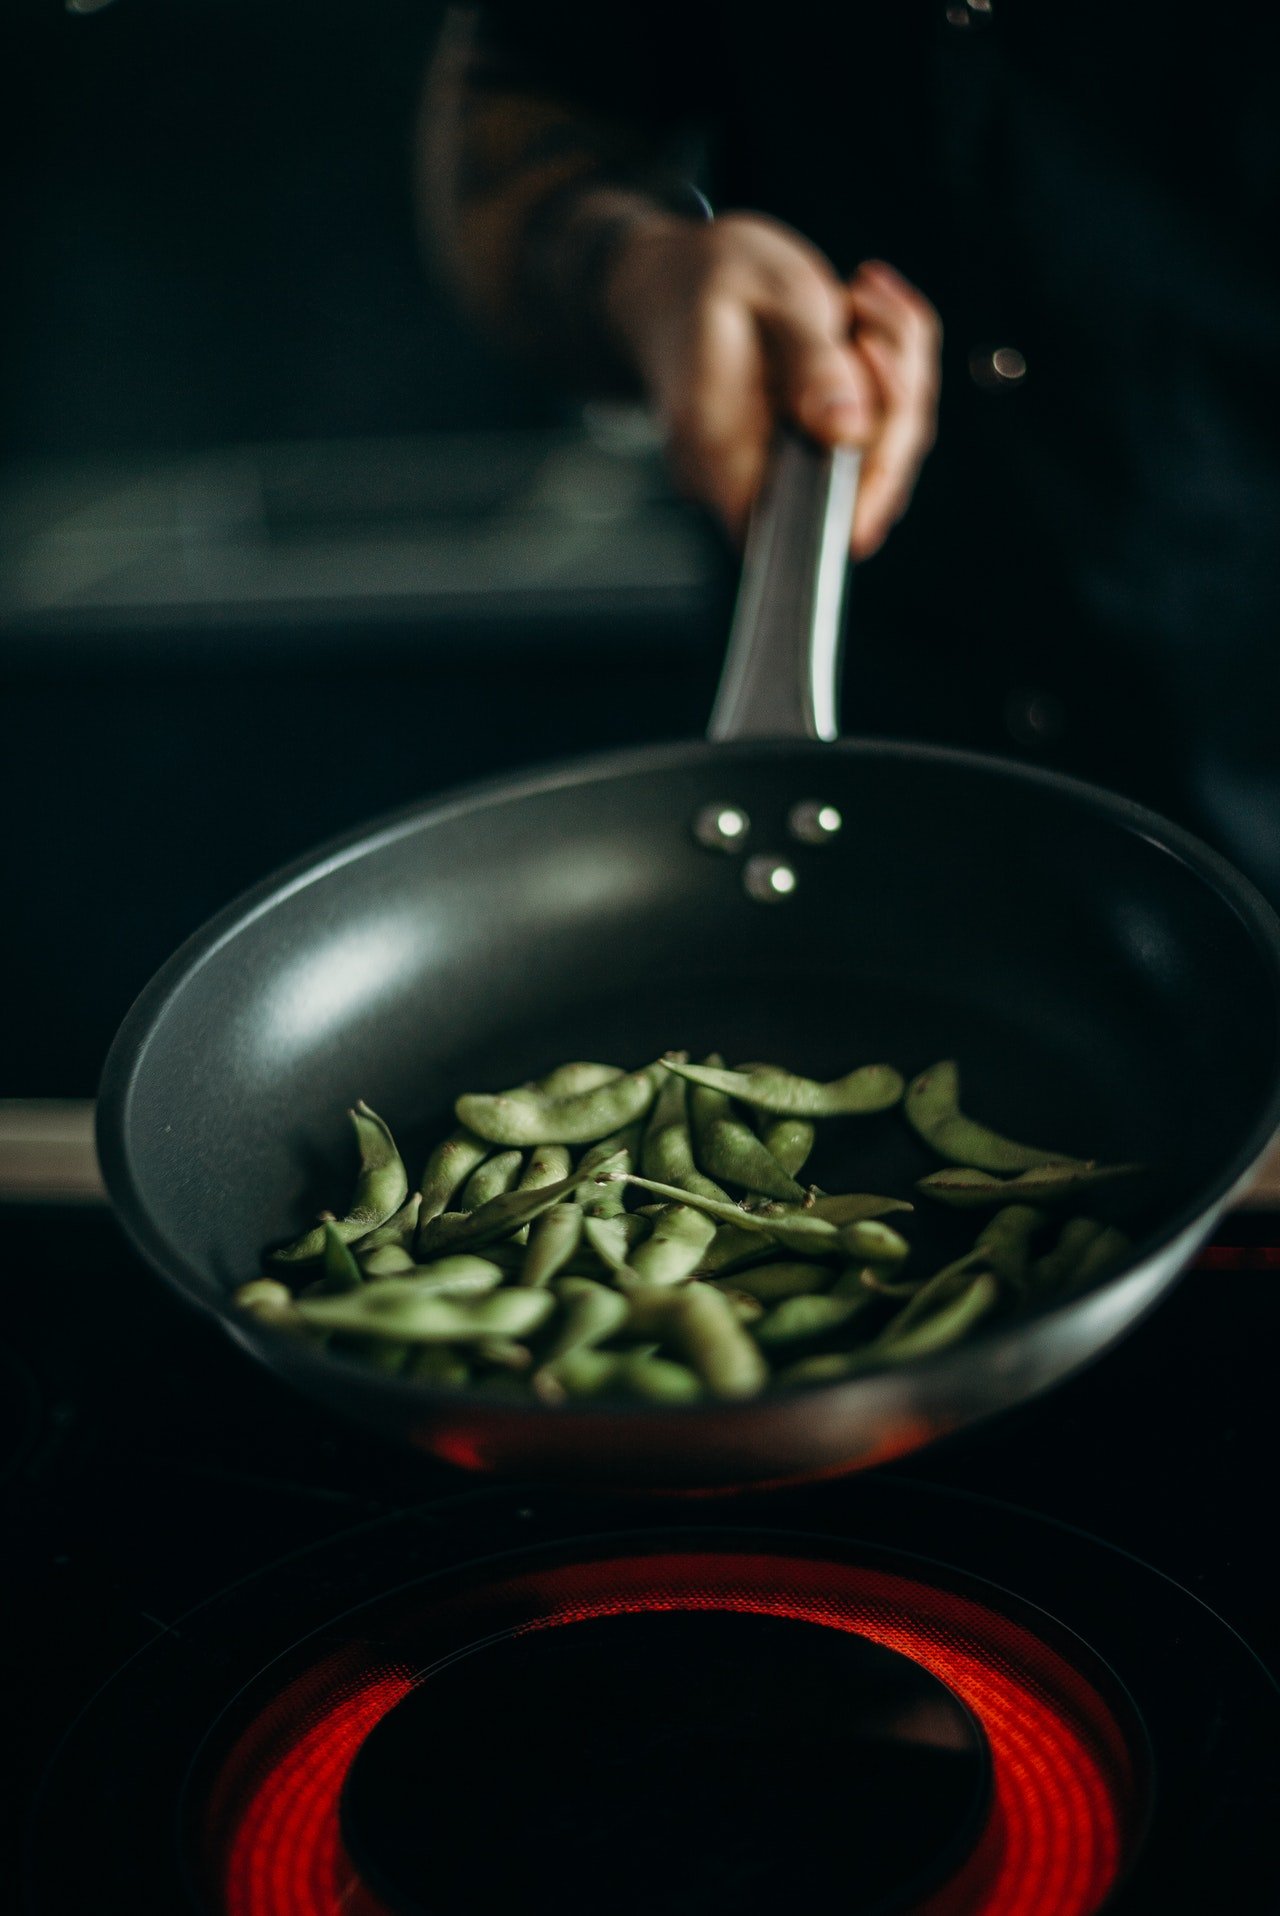 Person holding skillet with green beans | Source: Pexels